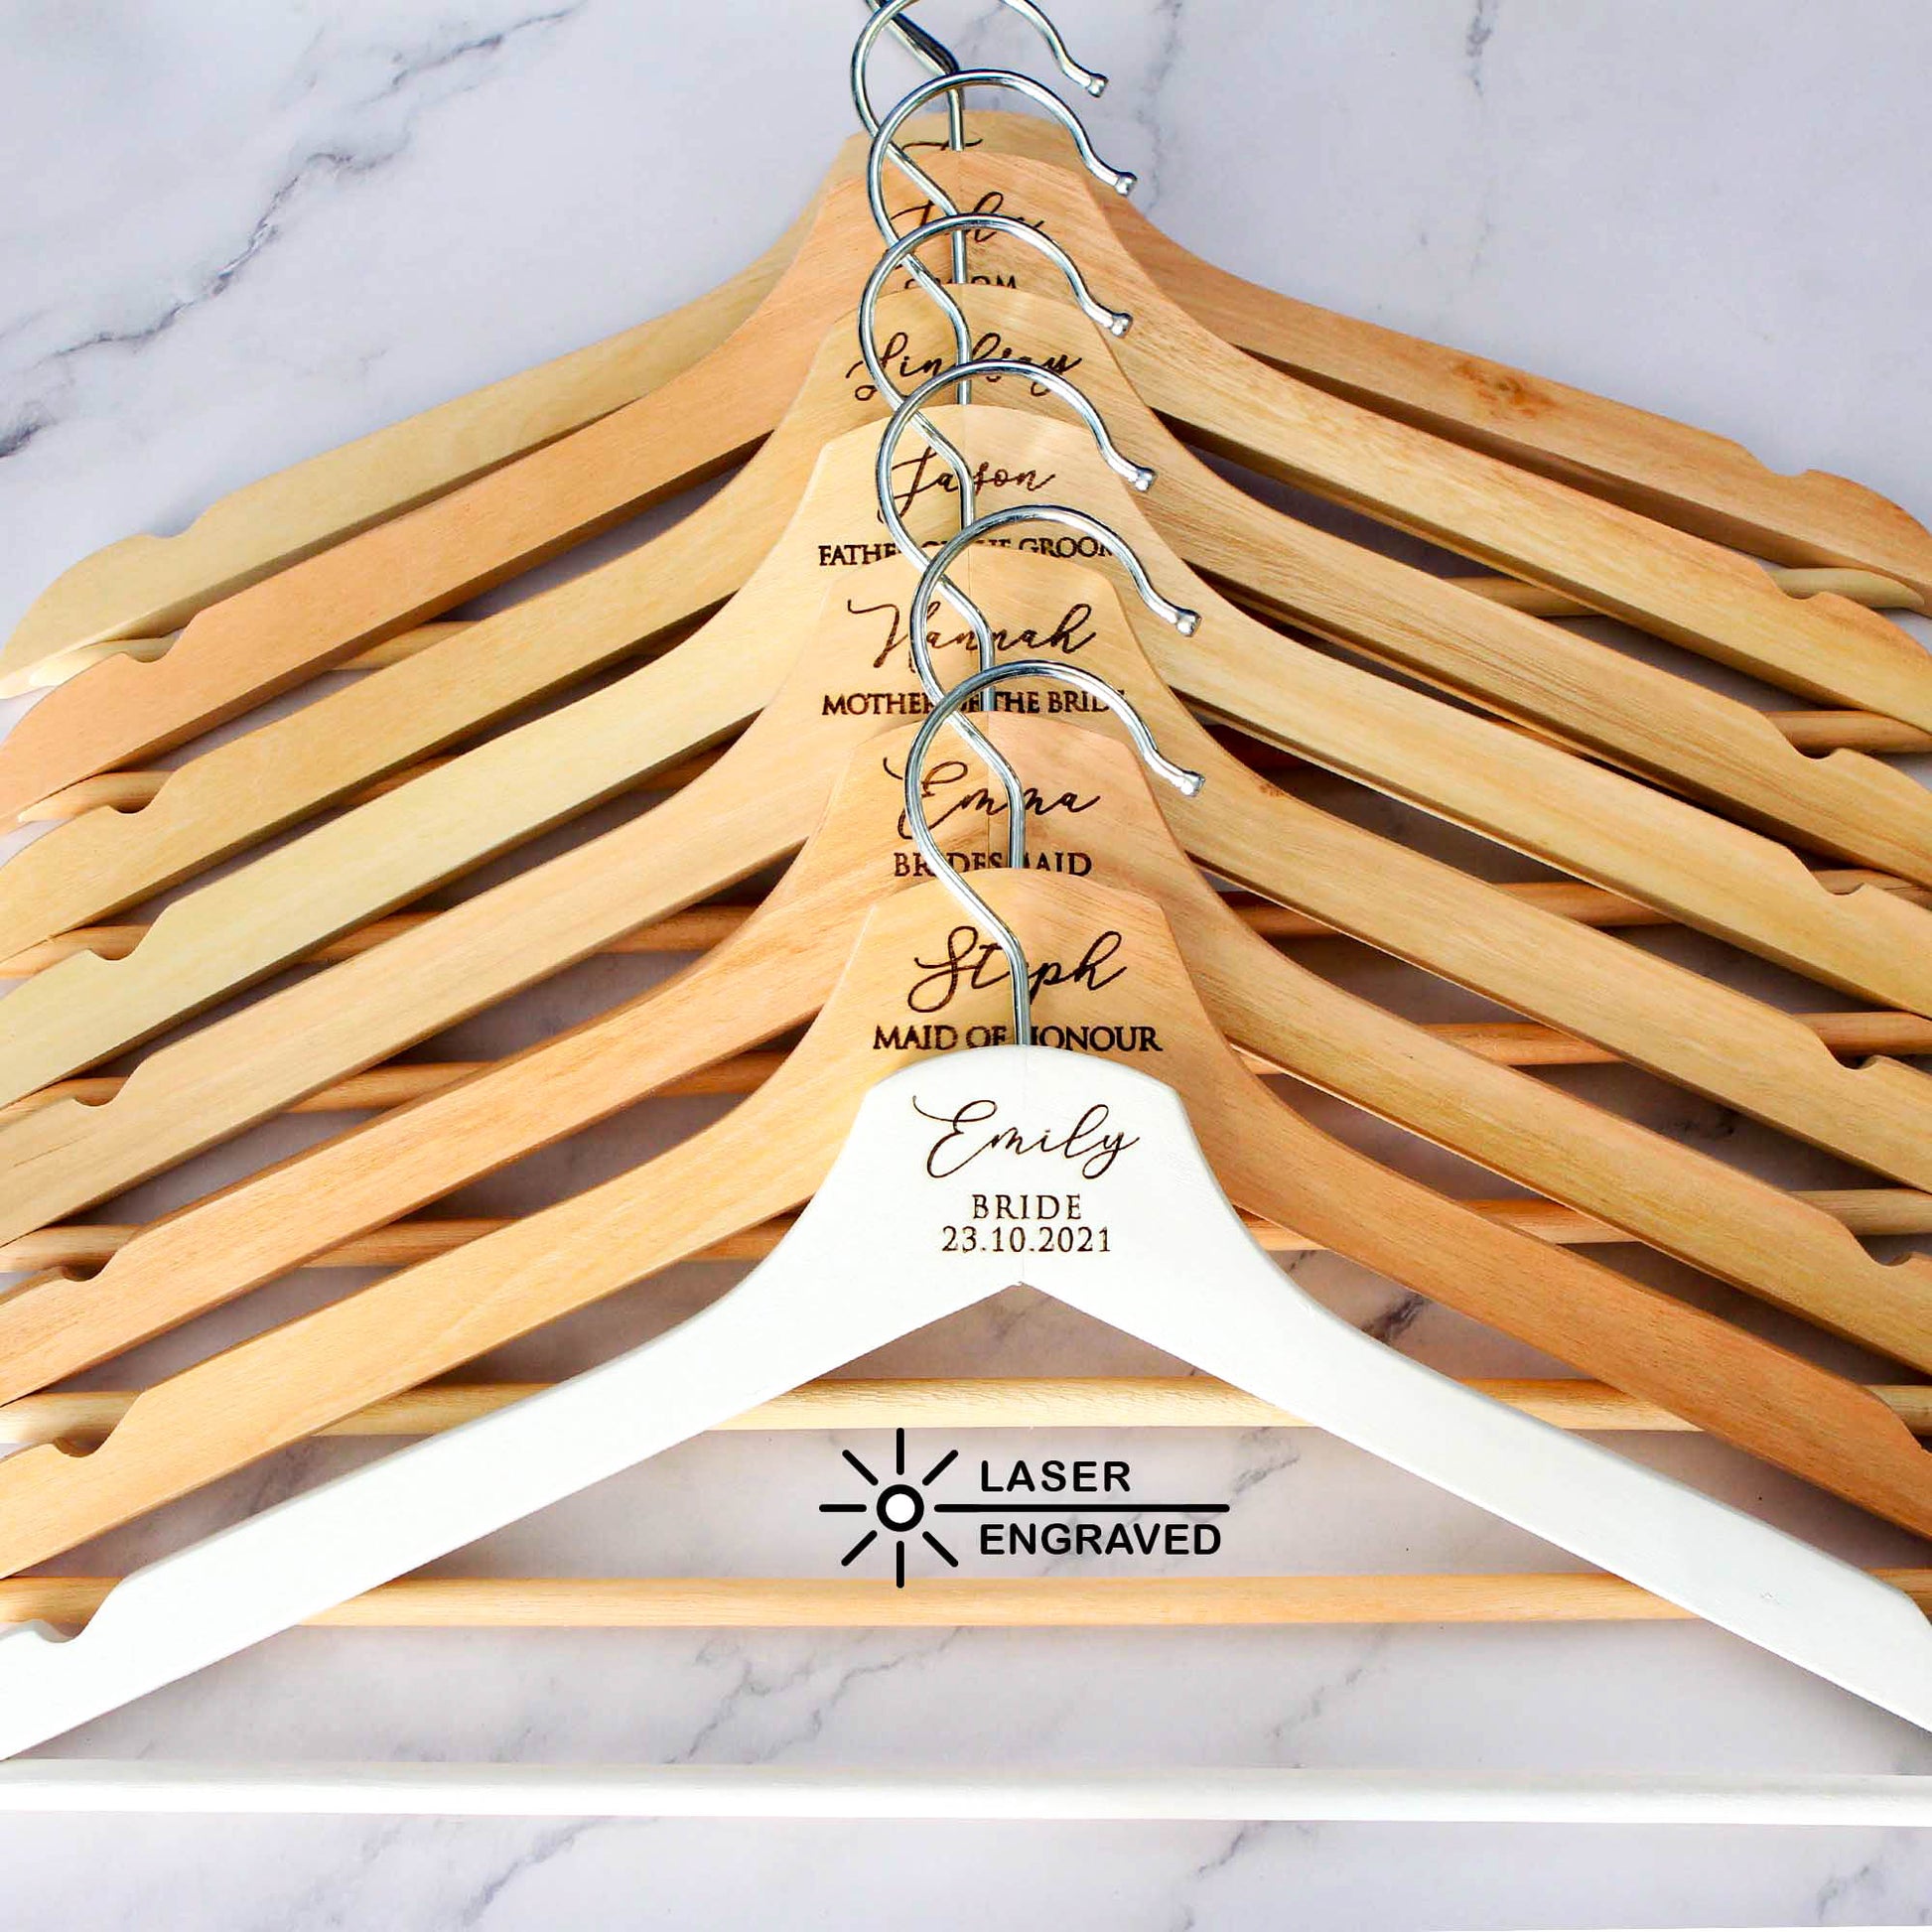 personalised hangers in white and natural wooden colour. The hangers are laser engraved the name, title and date of the wedding